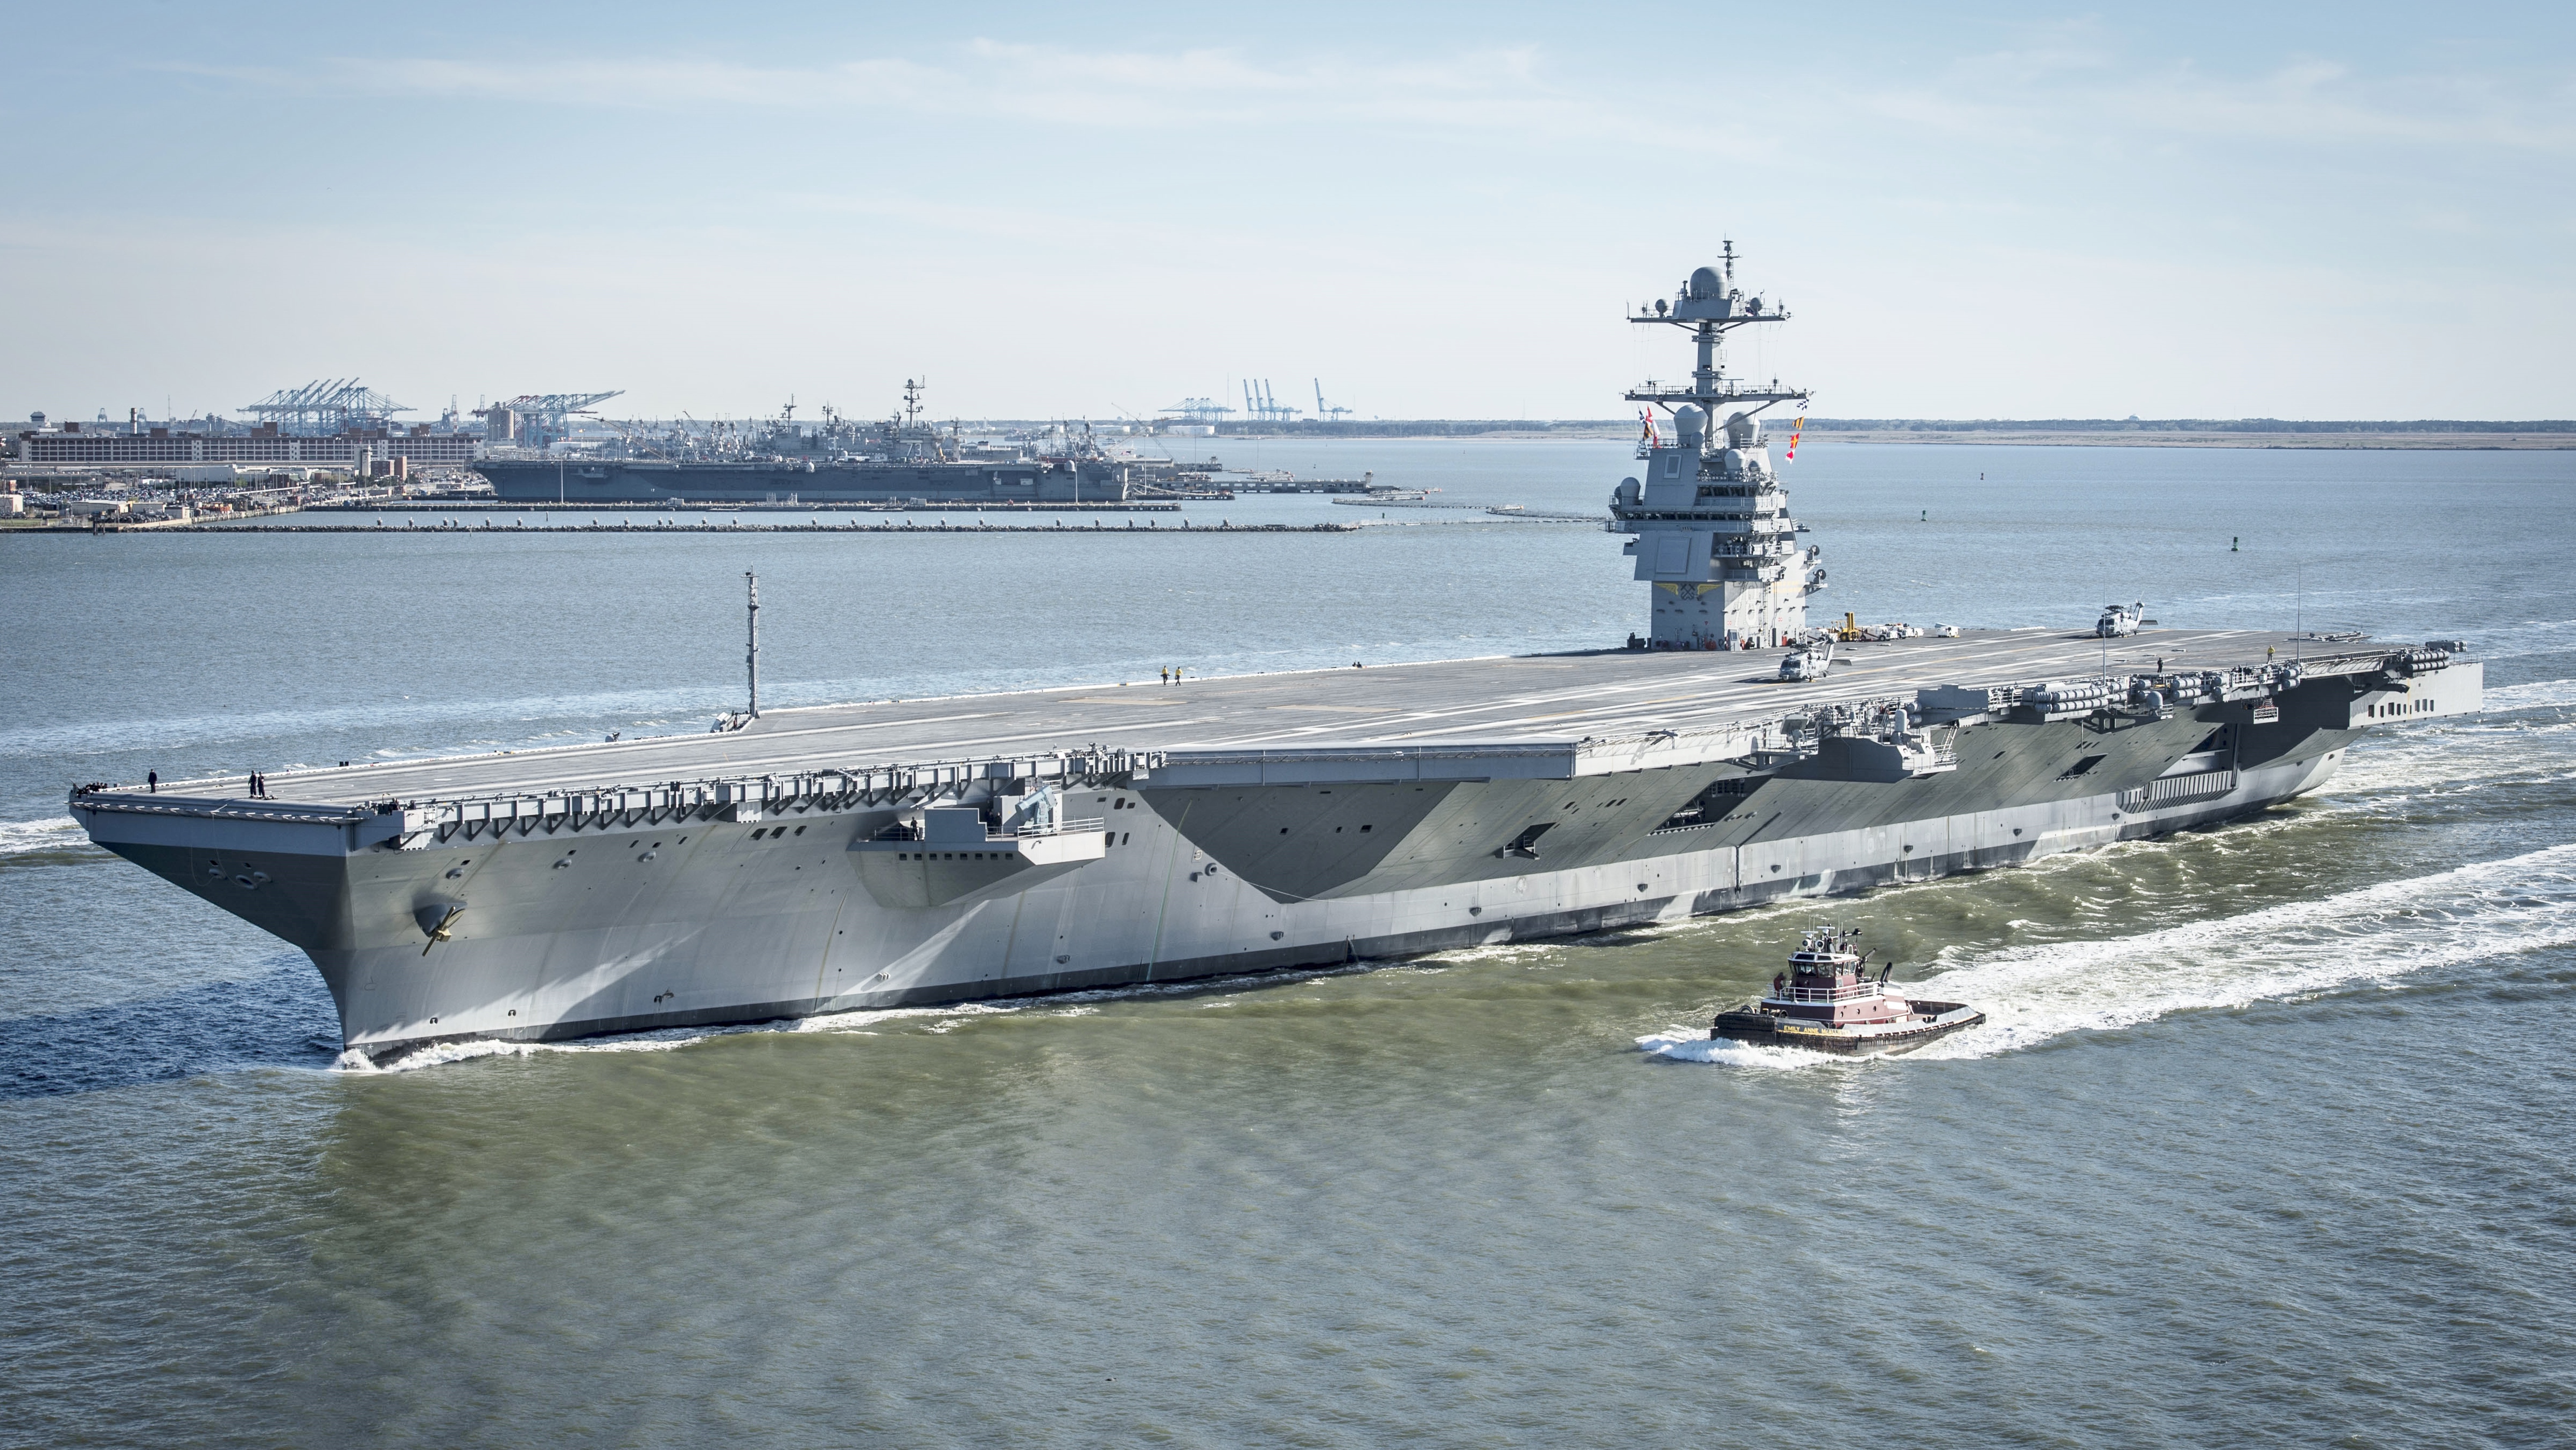 Gerald R. Ford-class aircraft carrier - Wikipedia